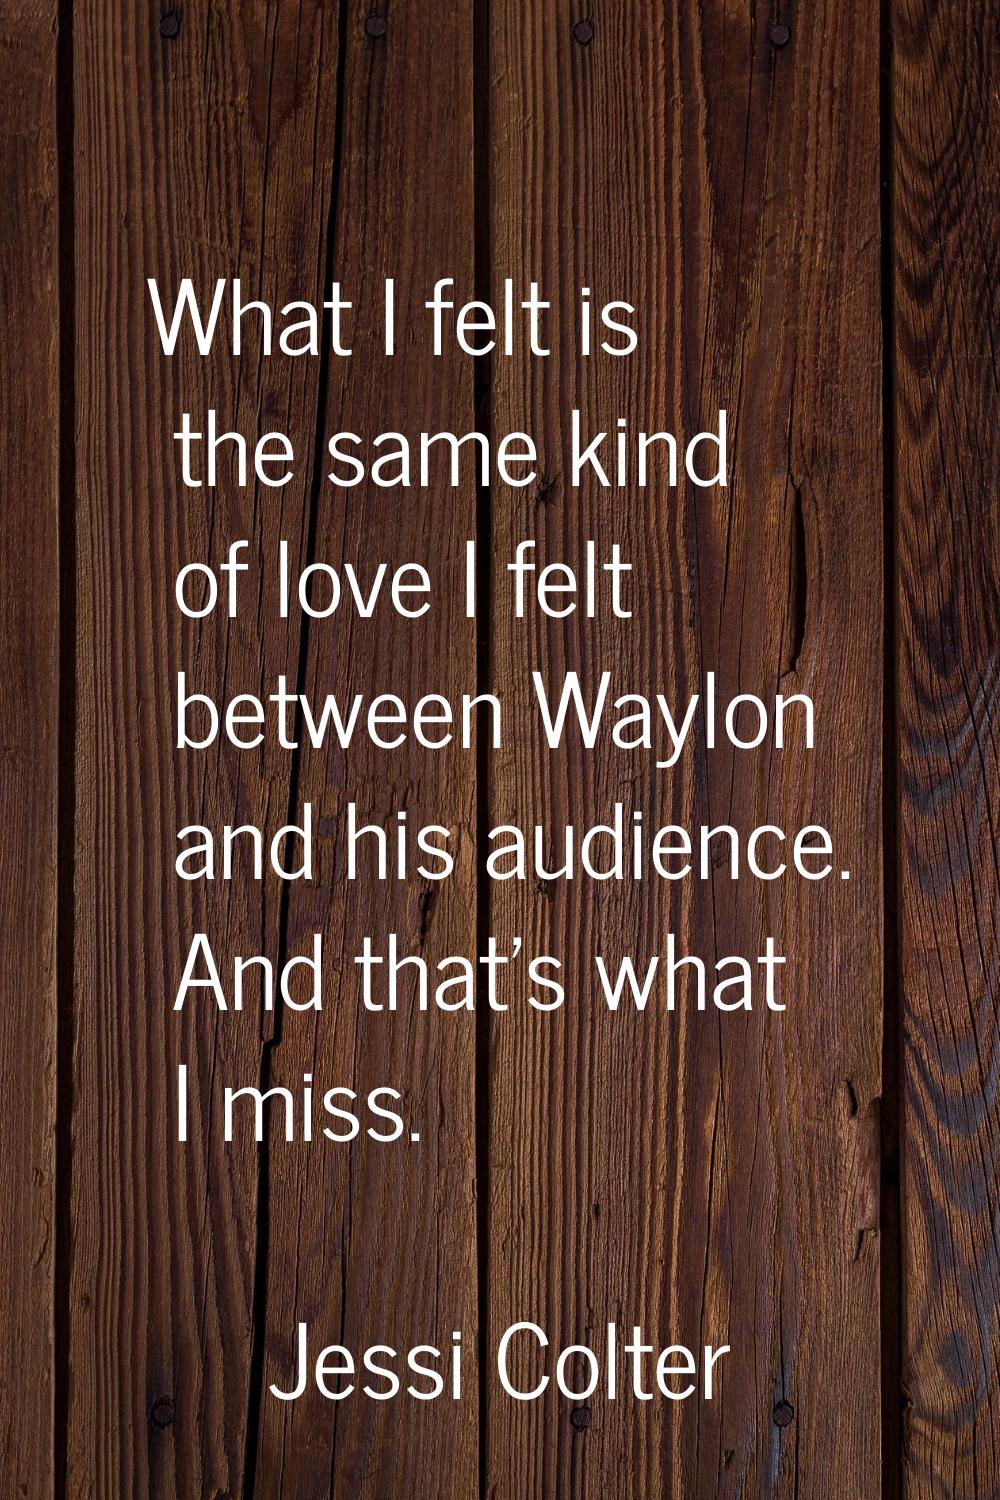 What I felt is the same kind of love I felt between Waylon and his audience. And that's what I miss